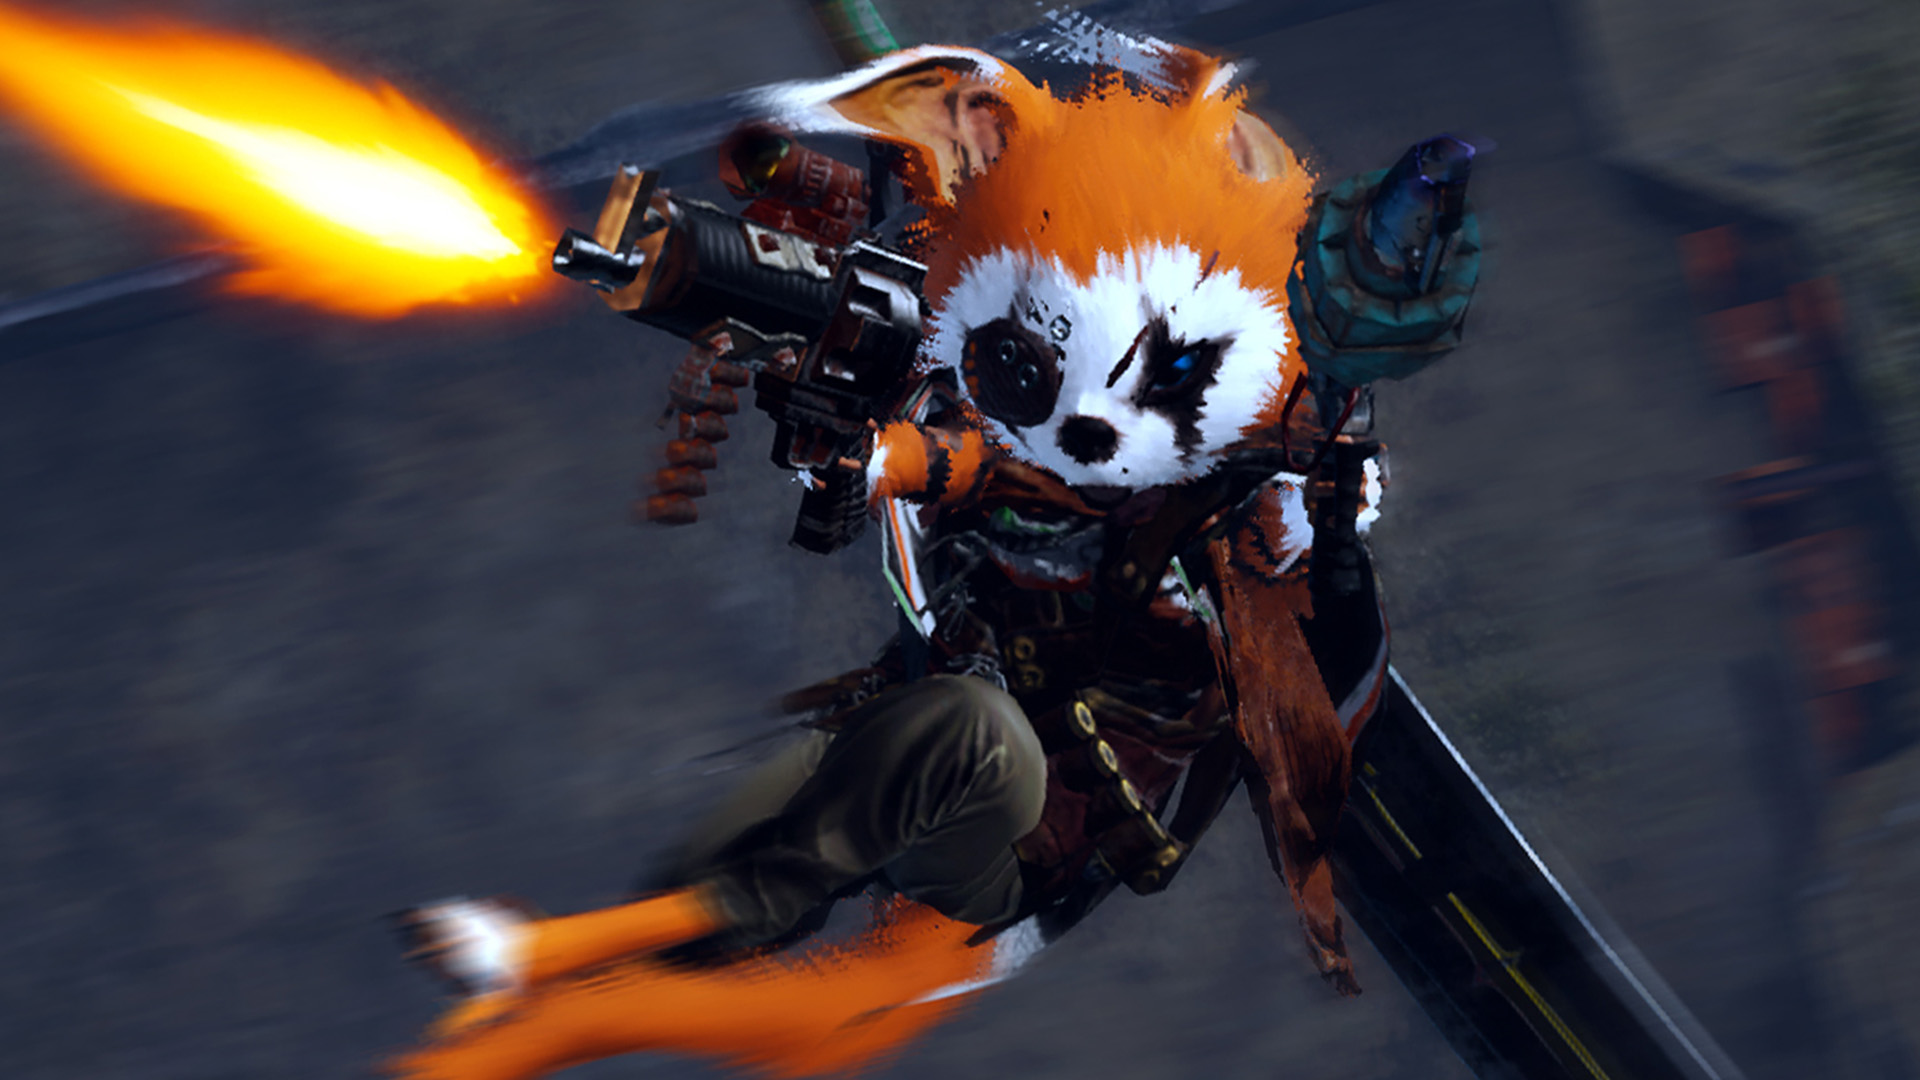 when is biomutant coming out